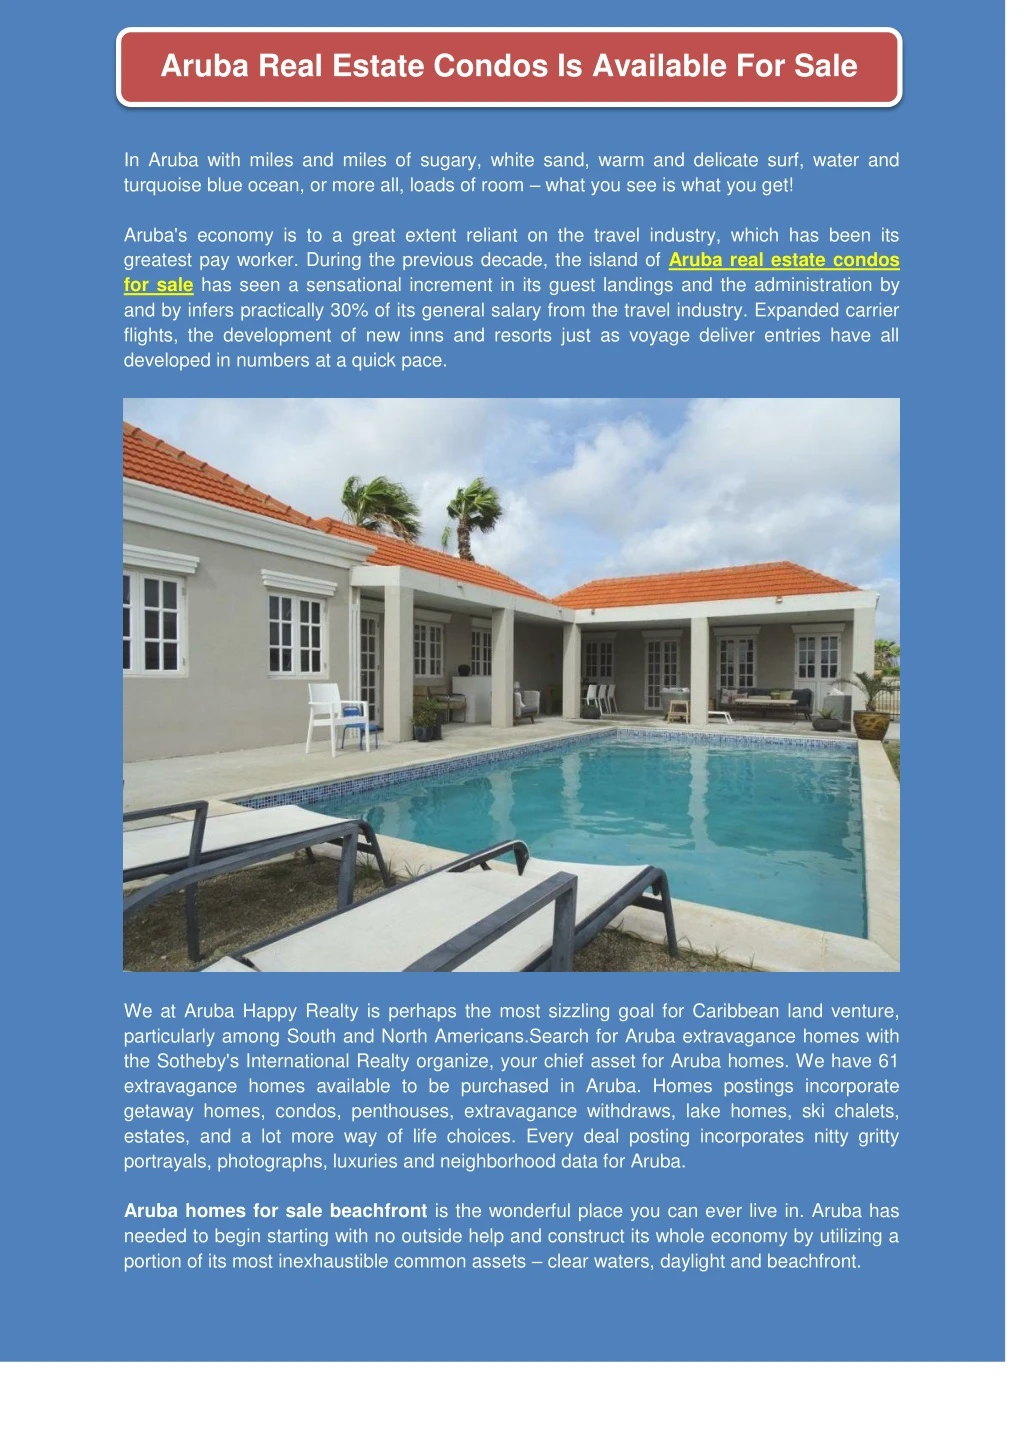 aruba real estate condos is available for sale